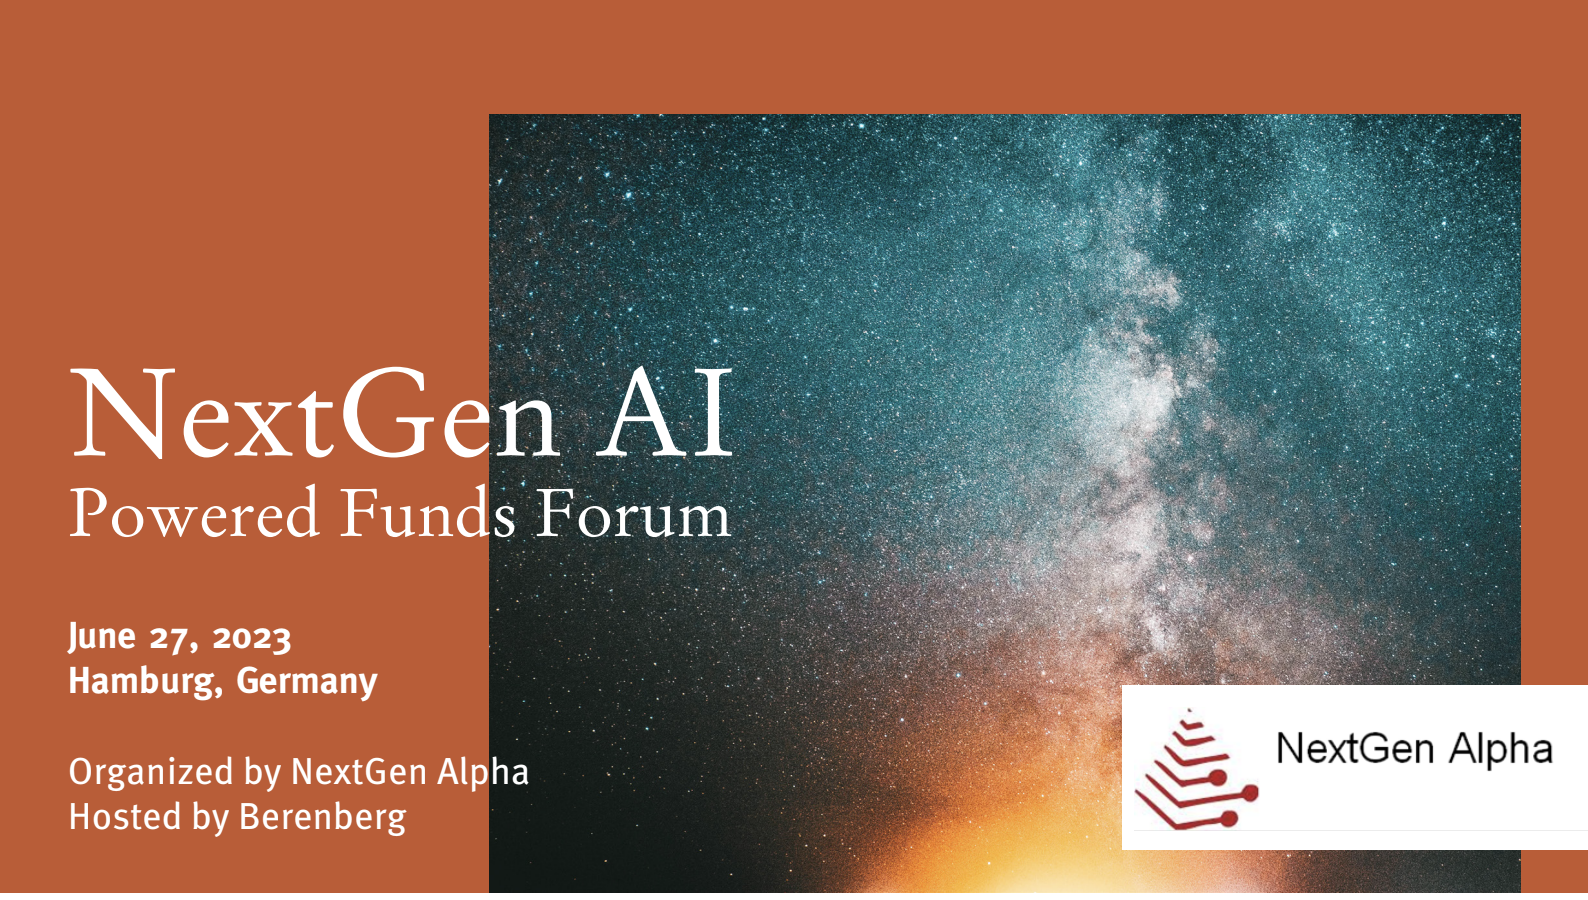 Event image of Next Gen AI Powered Funds Forum